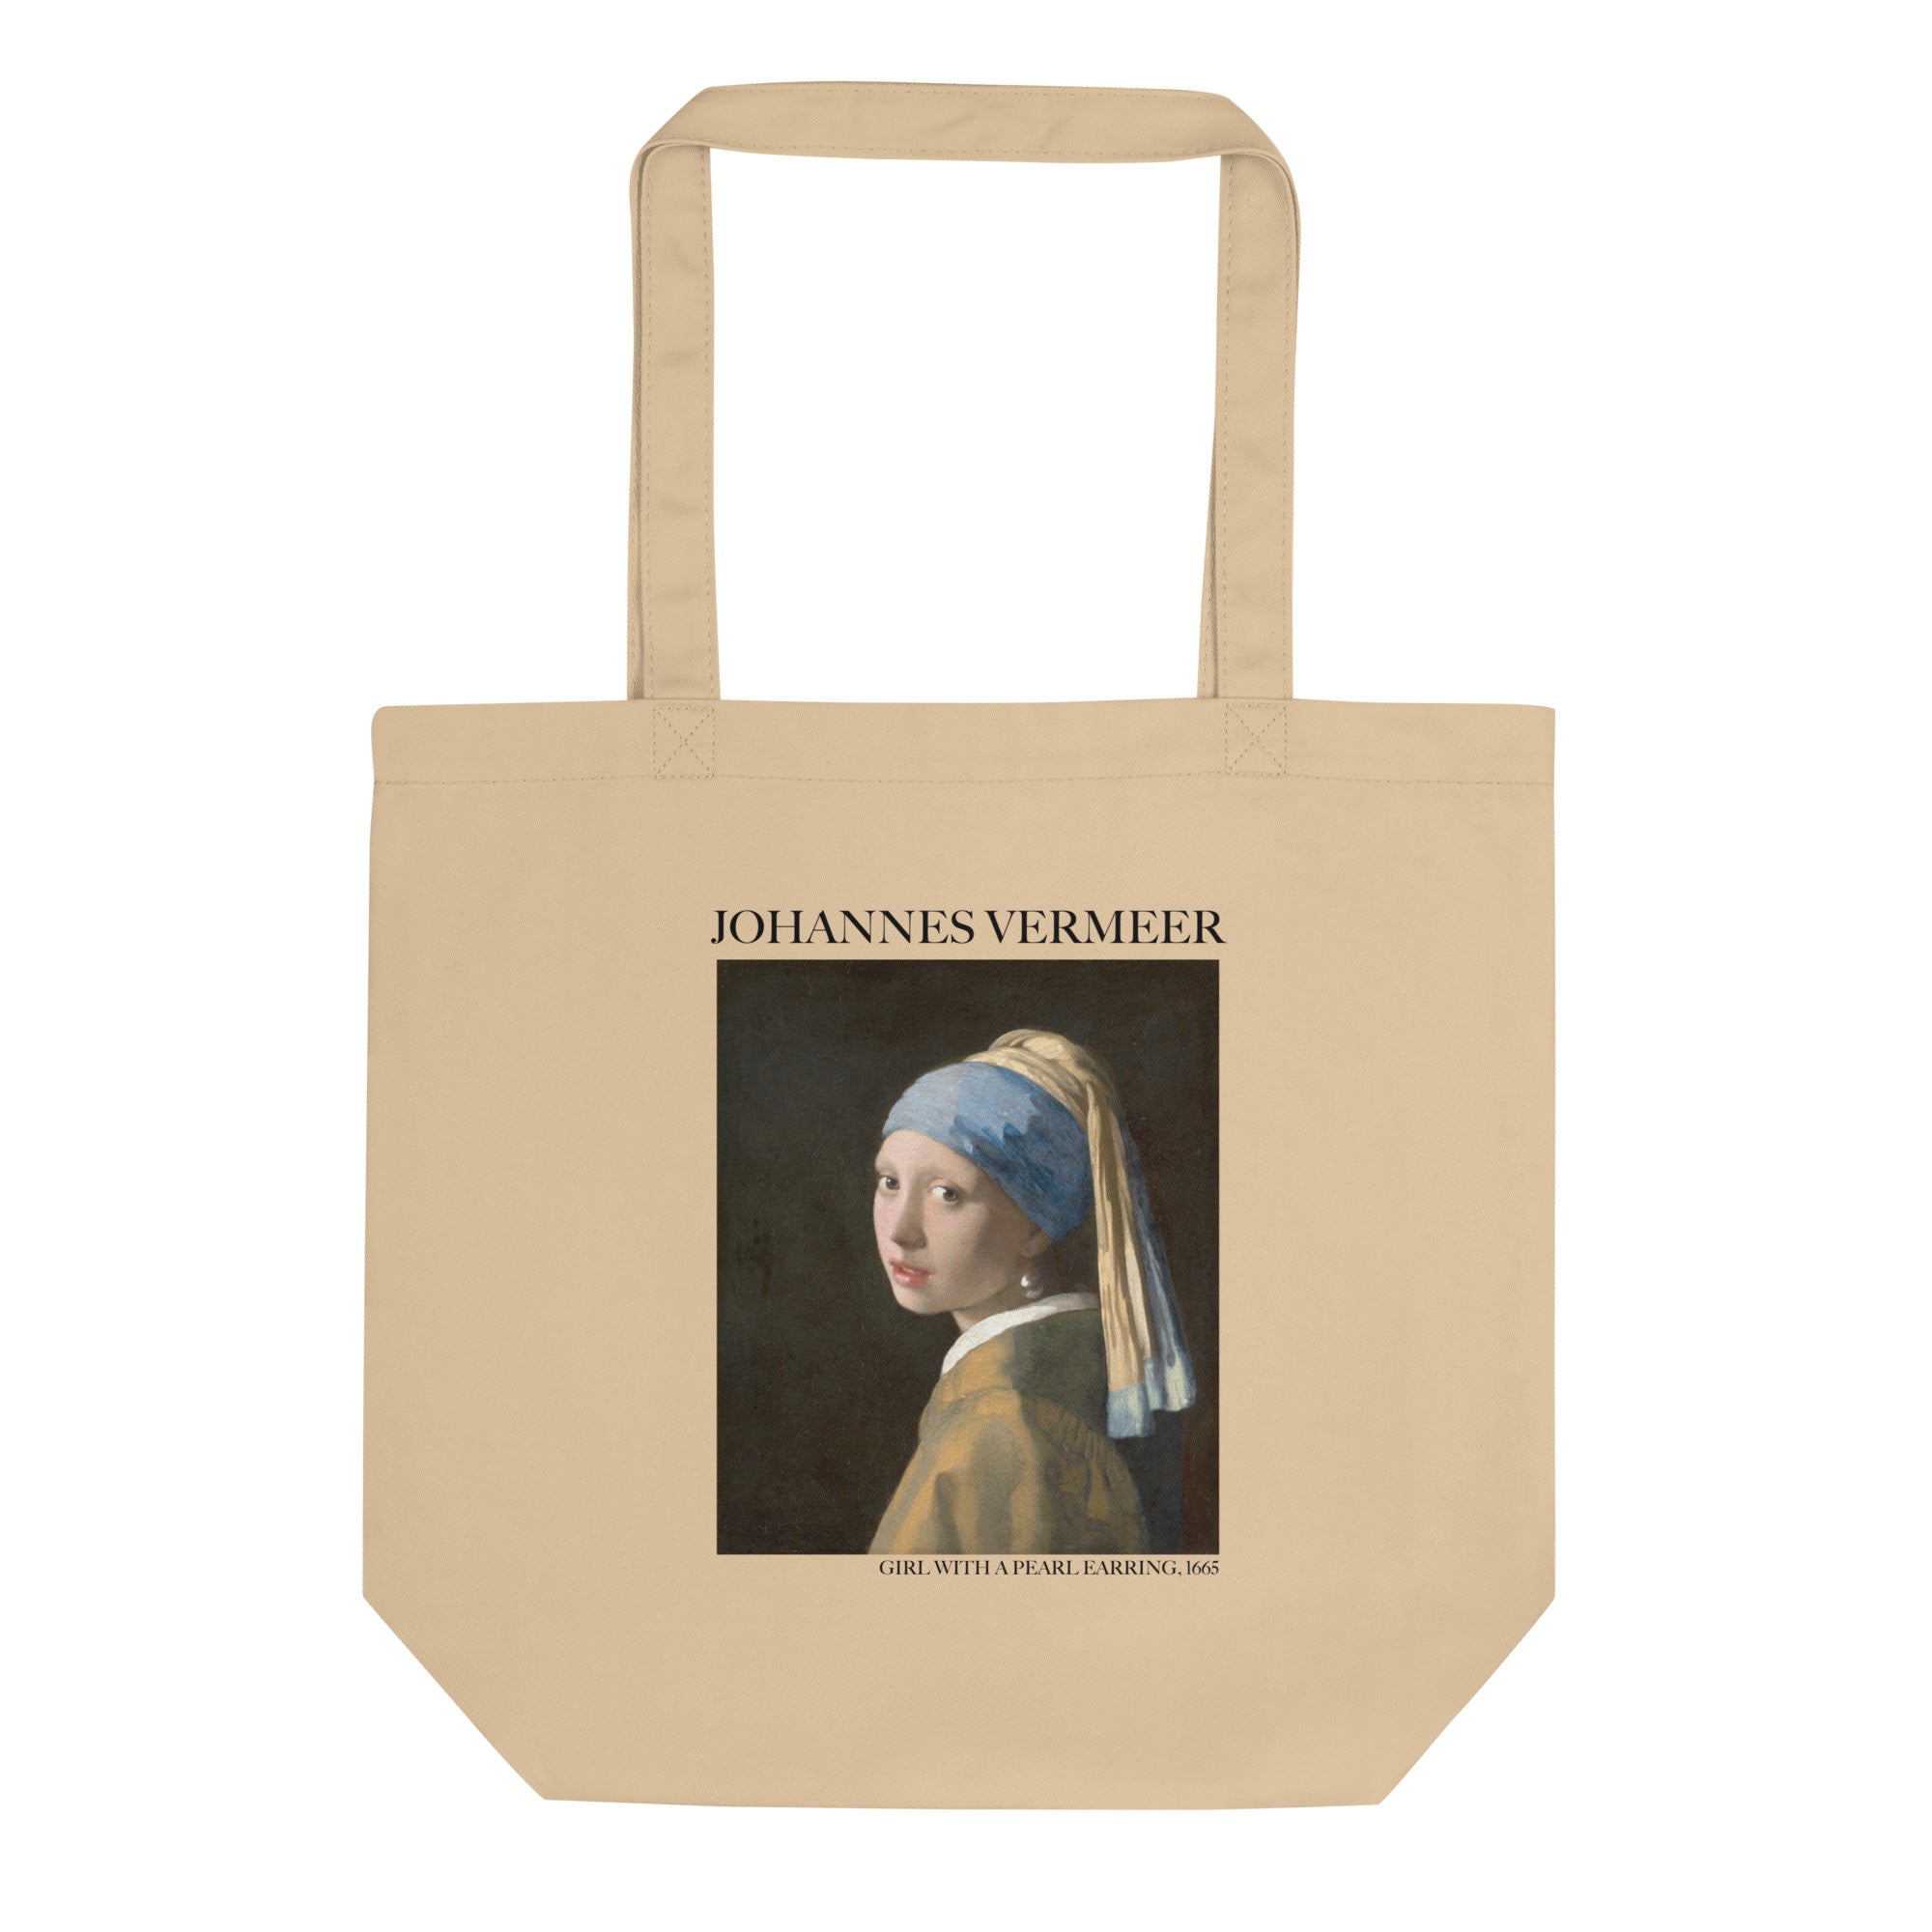 Johannes Vermeer 'Girl with a Pearl Earring' Famous Painting Totebag | Eco Friendly Art Tote Bag